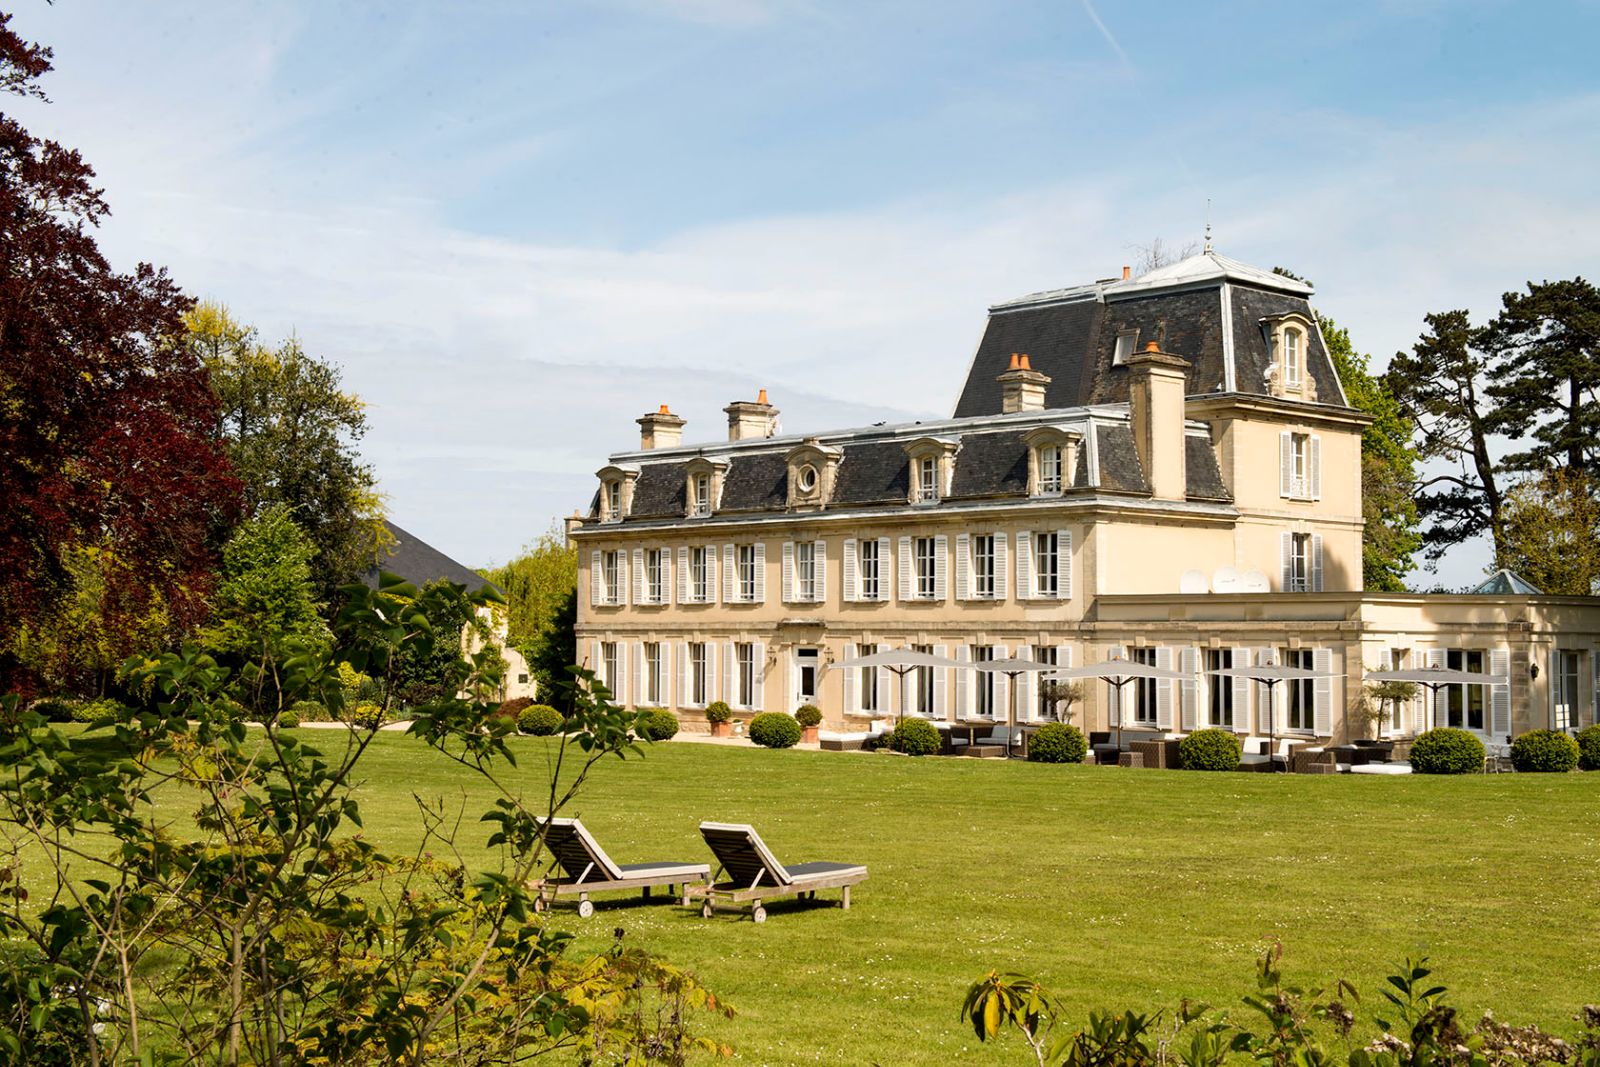 The exterior of Chateau La Cheneviere in the Normandy region of France